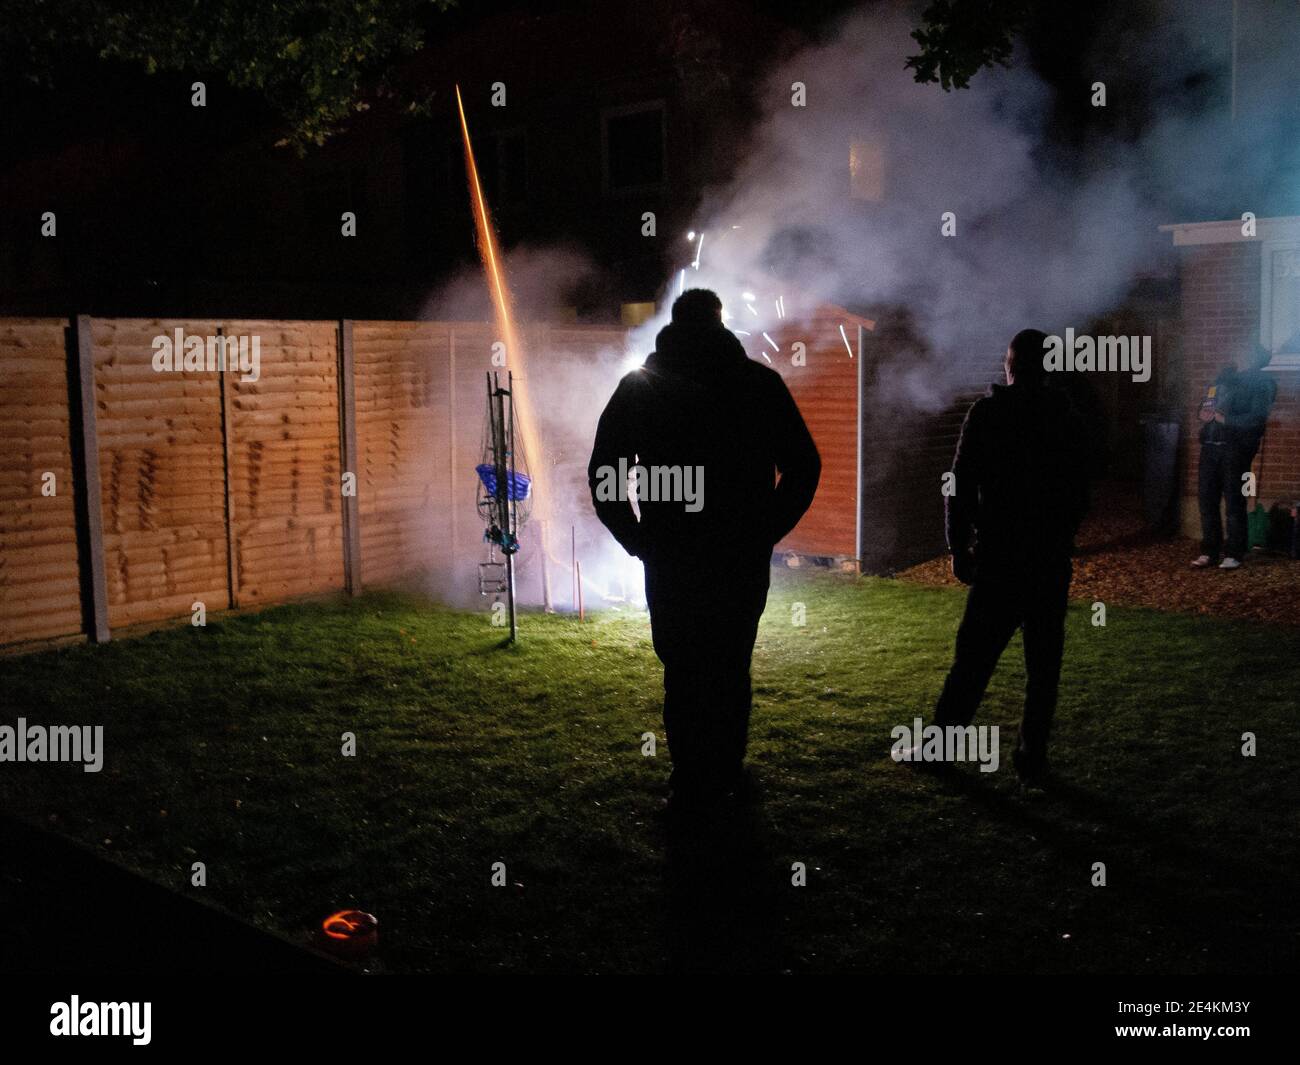 Two men watch as a firework rocket launches from a tube in a suburban back garden around the time of Guy Fawkes night in Bournemouth, Dorset. 04 November 2012. Photo: Neil Turner Stock Photo